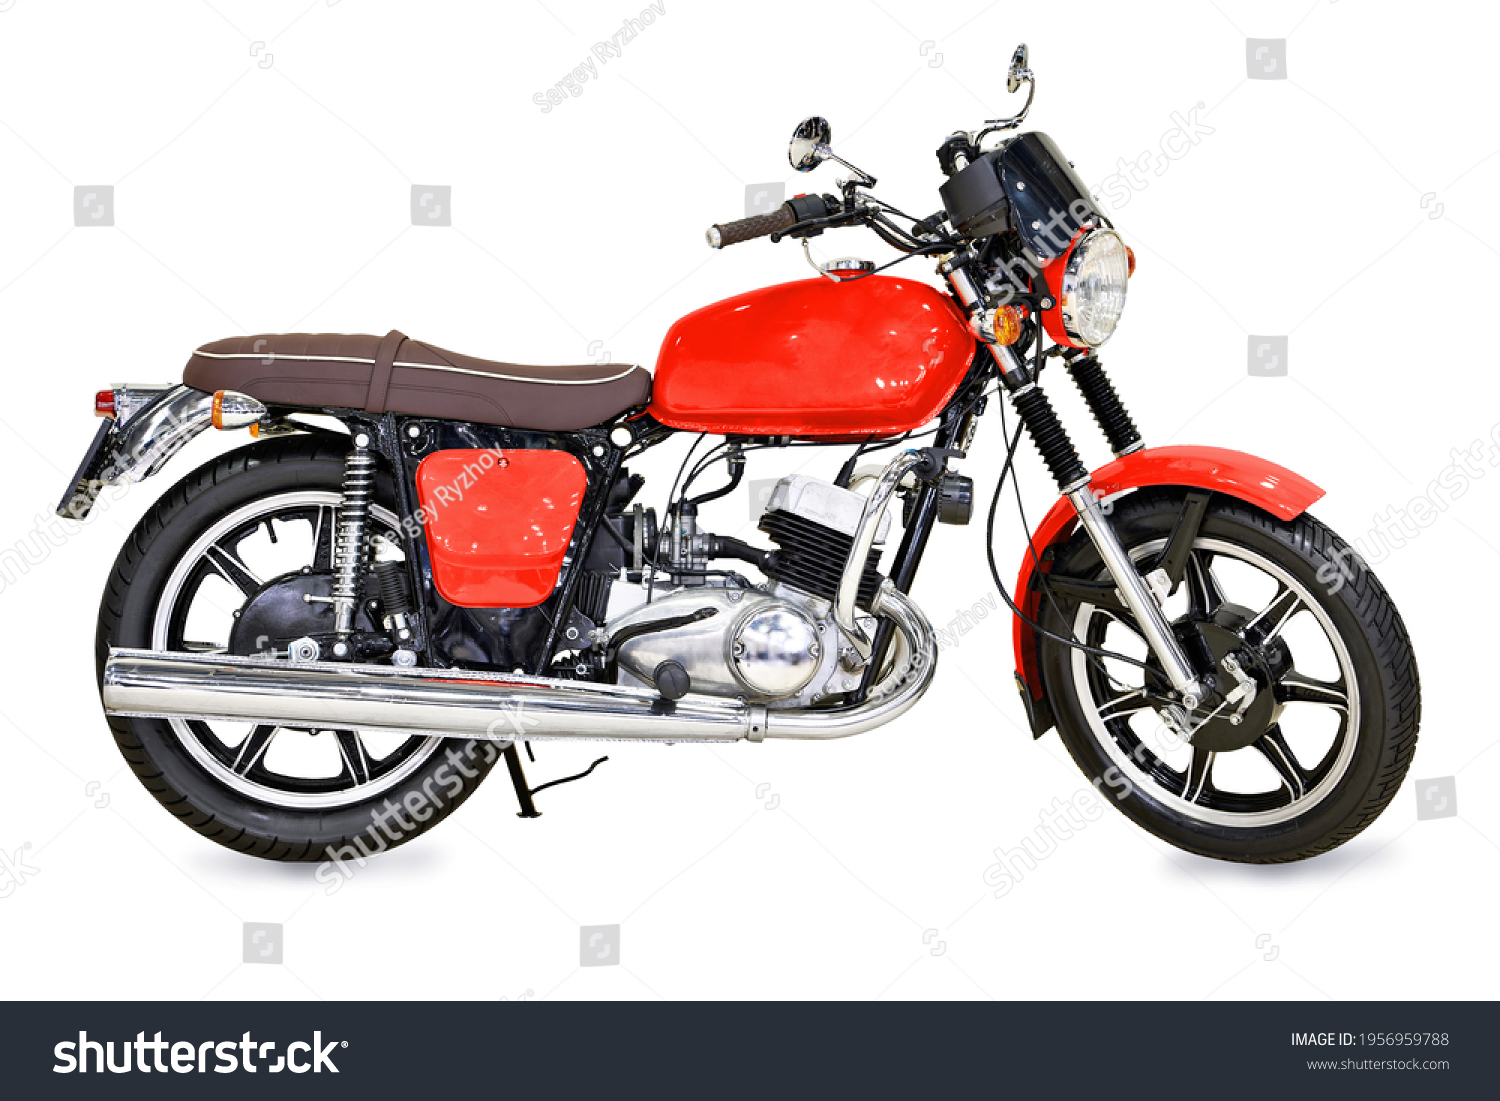 Classic road motorcycle isolated on white background #1956959788